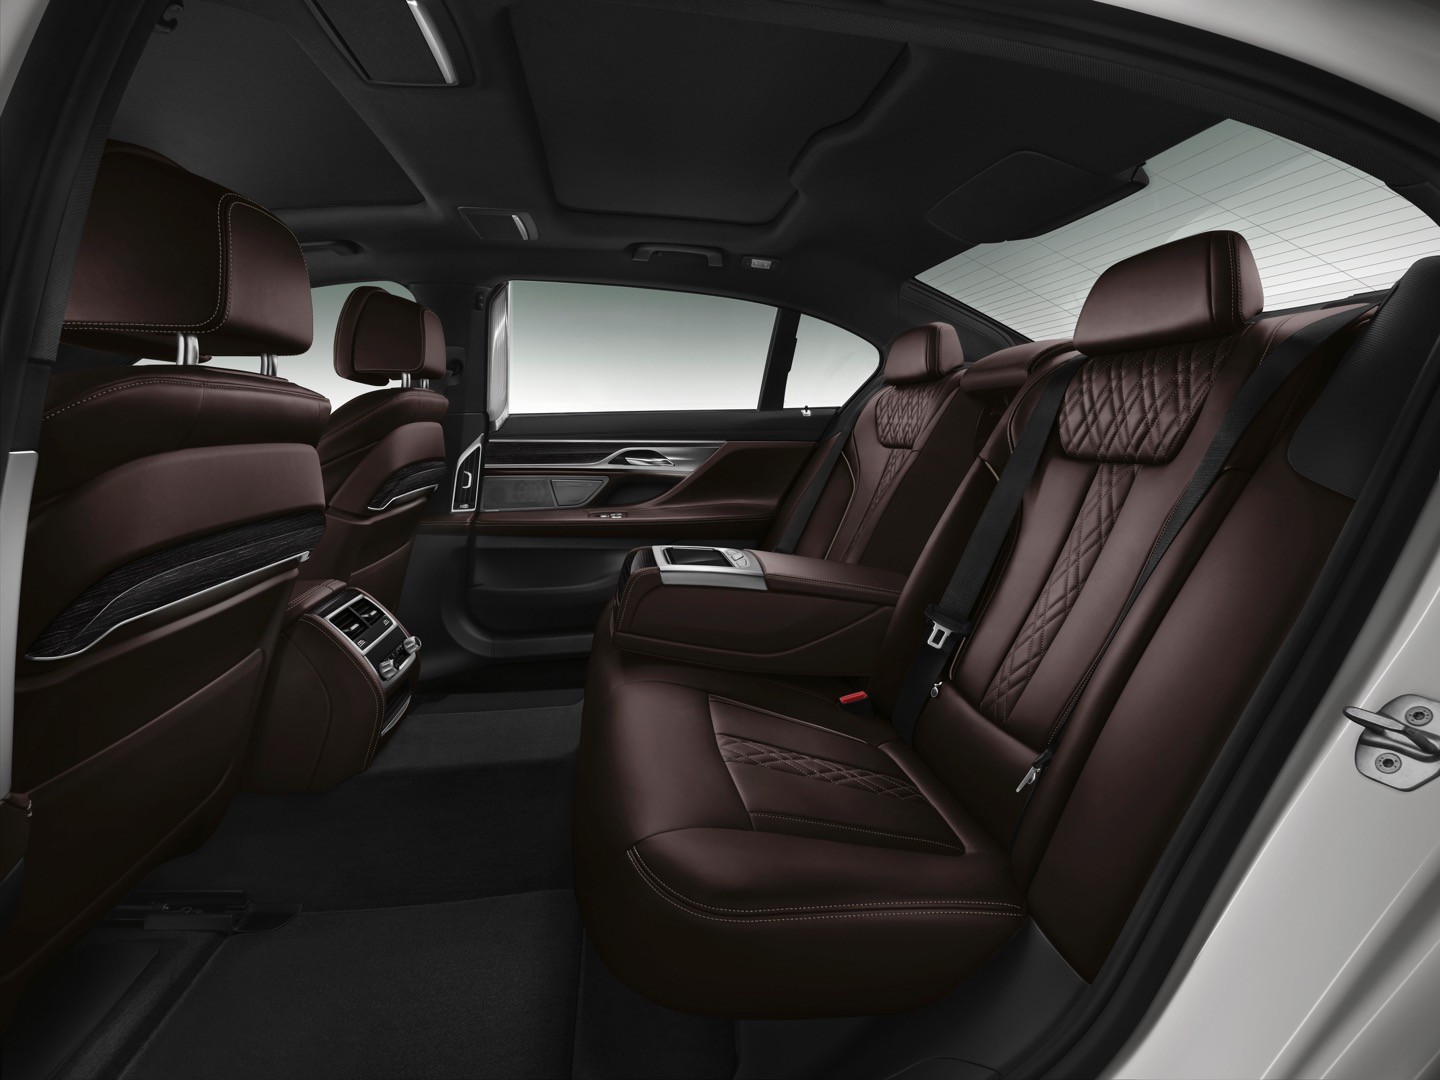 2016-bmw-7-series-finally-officially-unveiled-the-good-stuffs-inside-photo-gallery_113